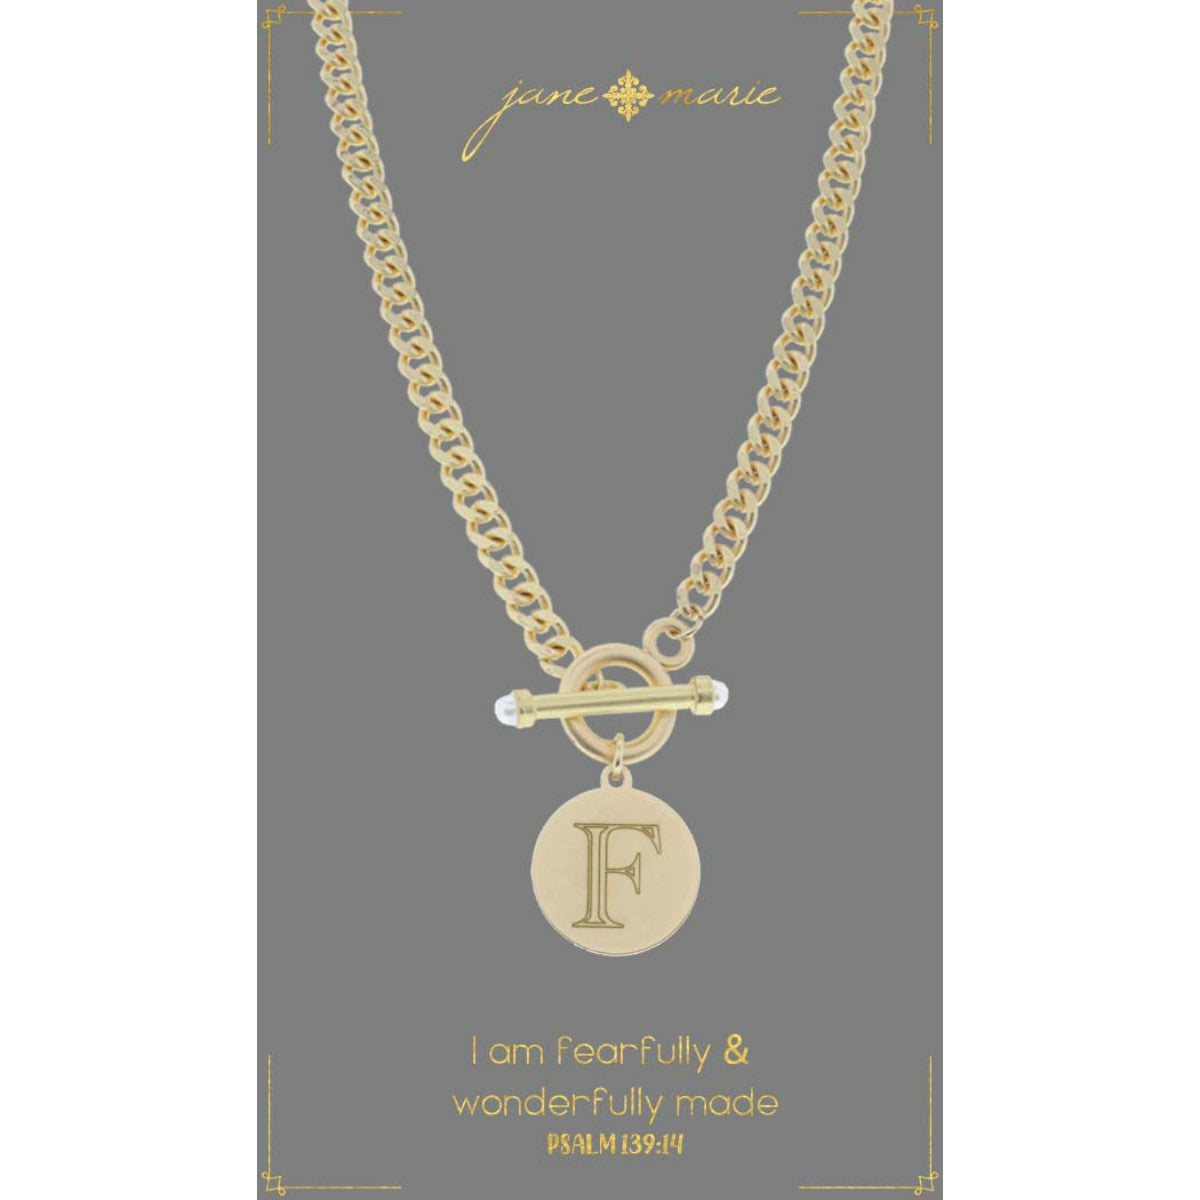 "f" stamped letter necklace on a gray display card on a white background